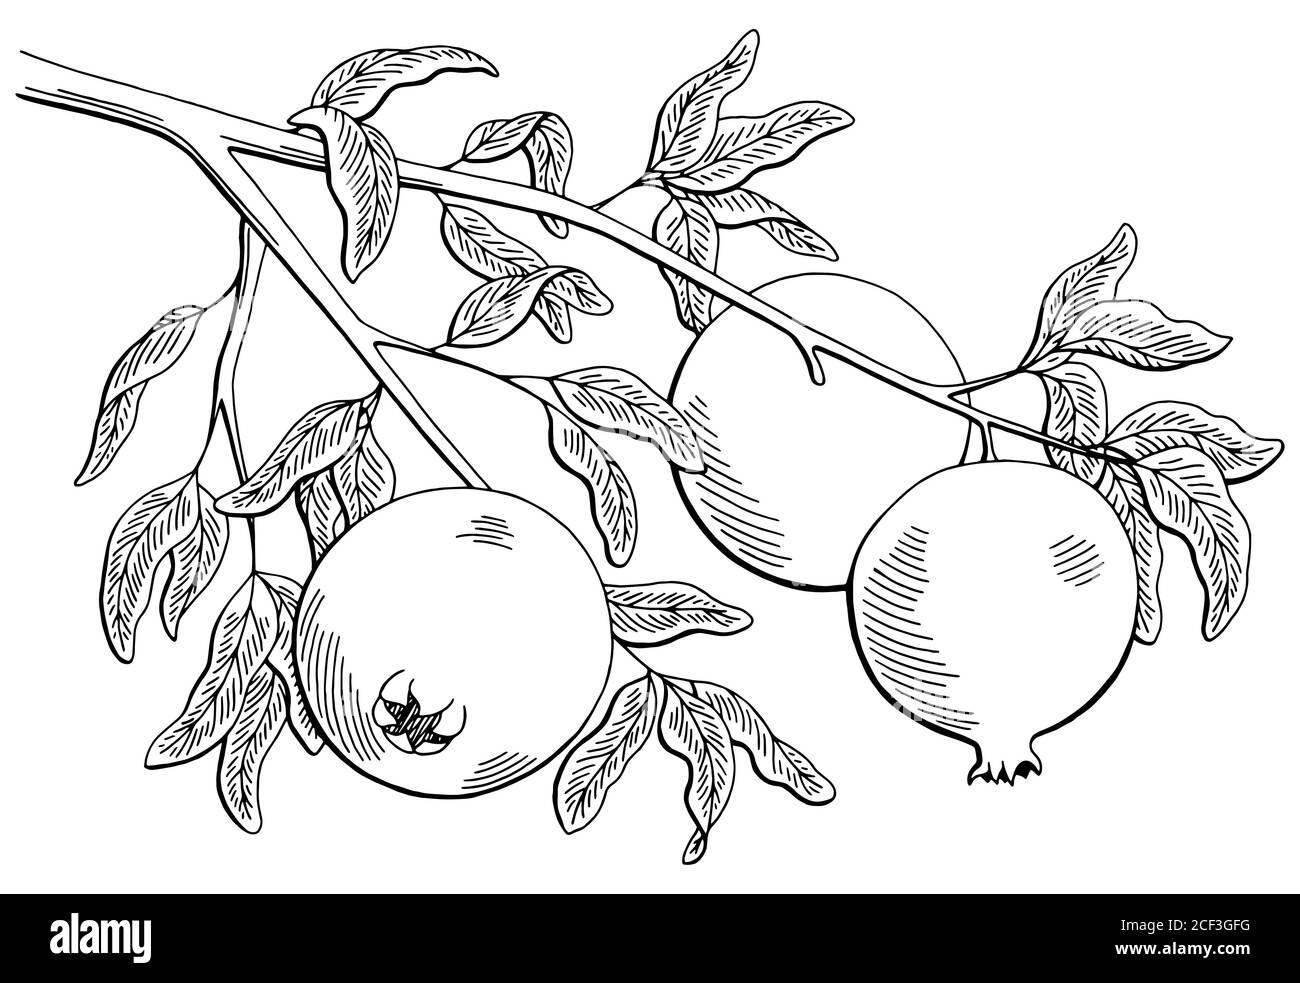 Pomegranate fruit graphic branch black white isolated sketch illustration vector Stock Vector